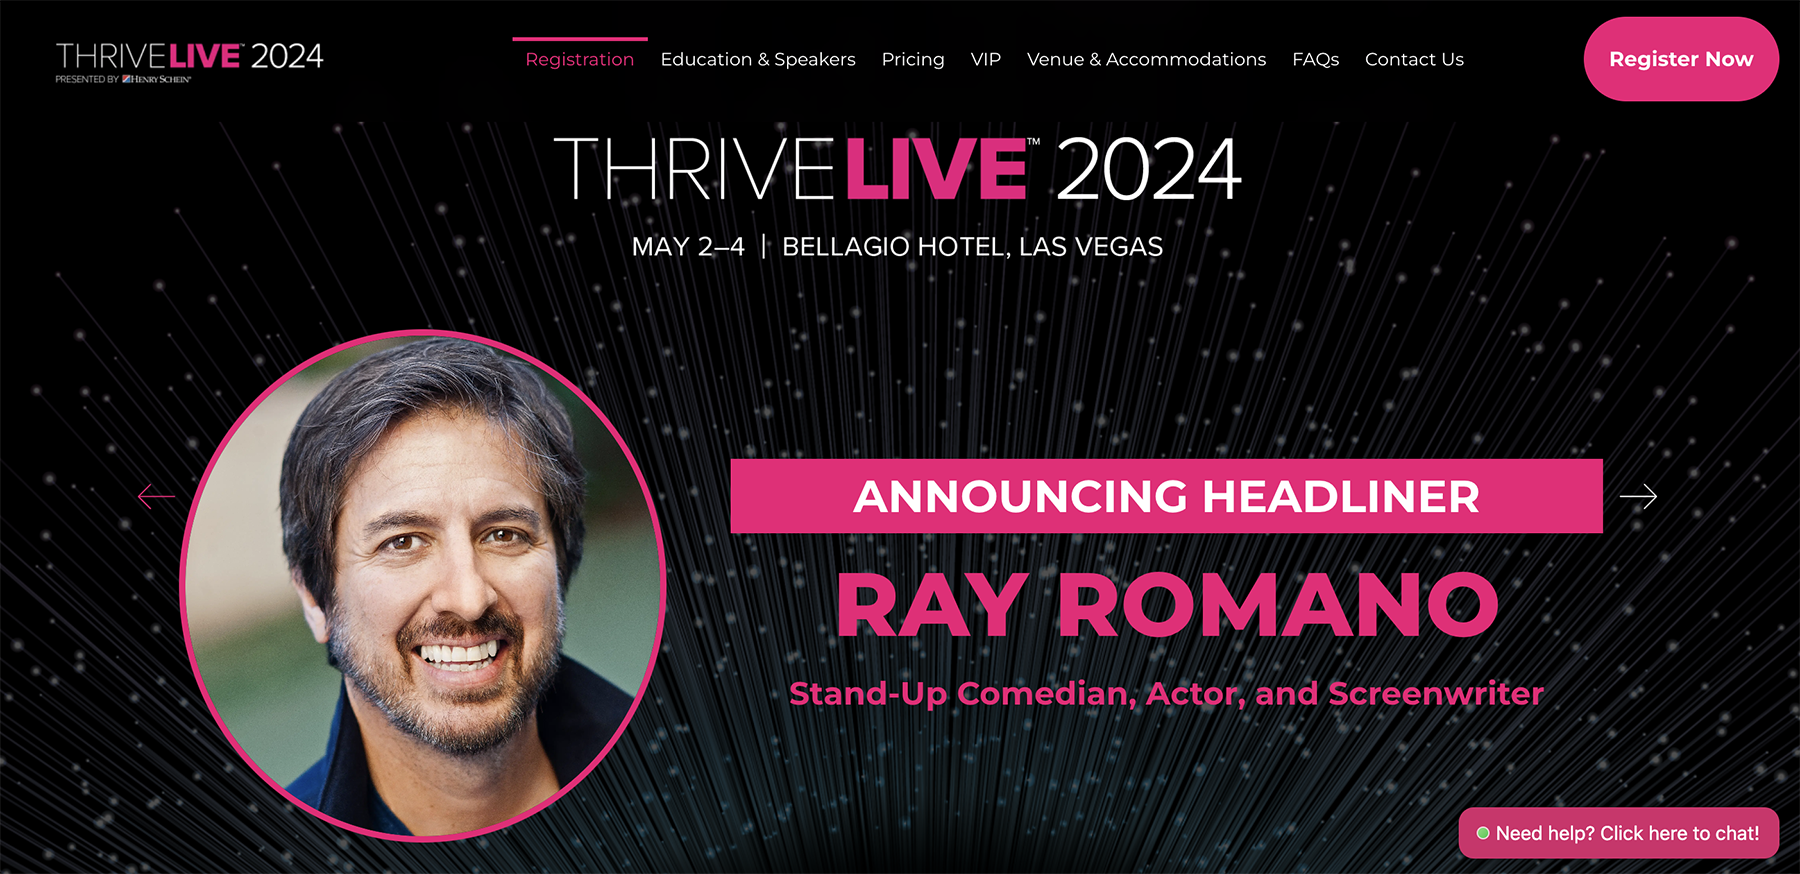 Henry Schein’s THRIVELIVE 2024 Returns to Las Vegas in May | Image Credit: © Henry Schein, Inc